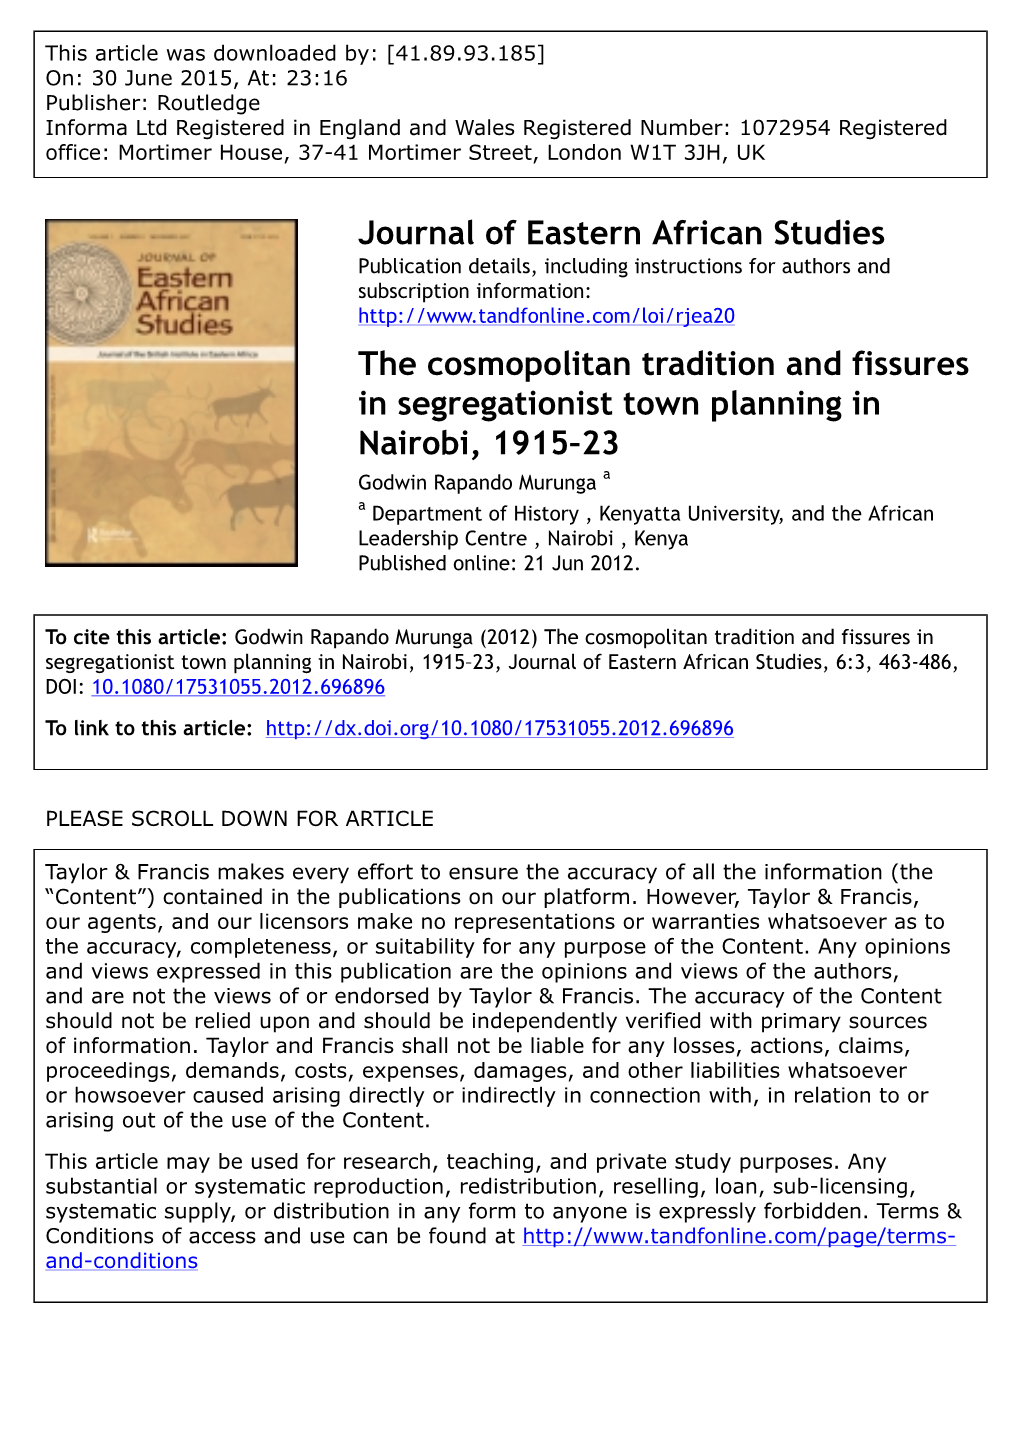 Journal of Eastern African Studies the Cosmopolitan Tradition and Fissures in Segregationist Town Planning in Nairobi, 1915–23